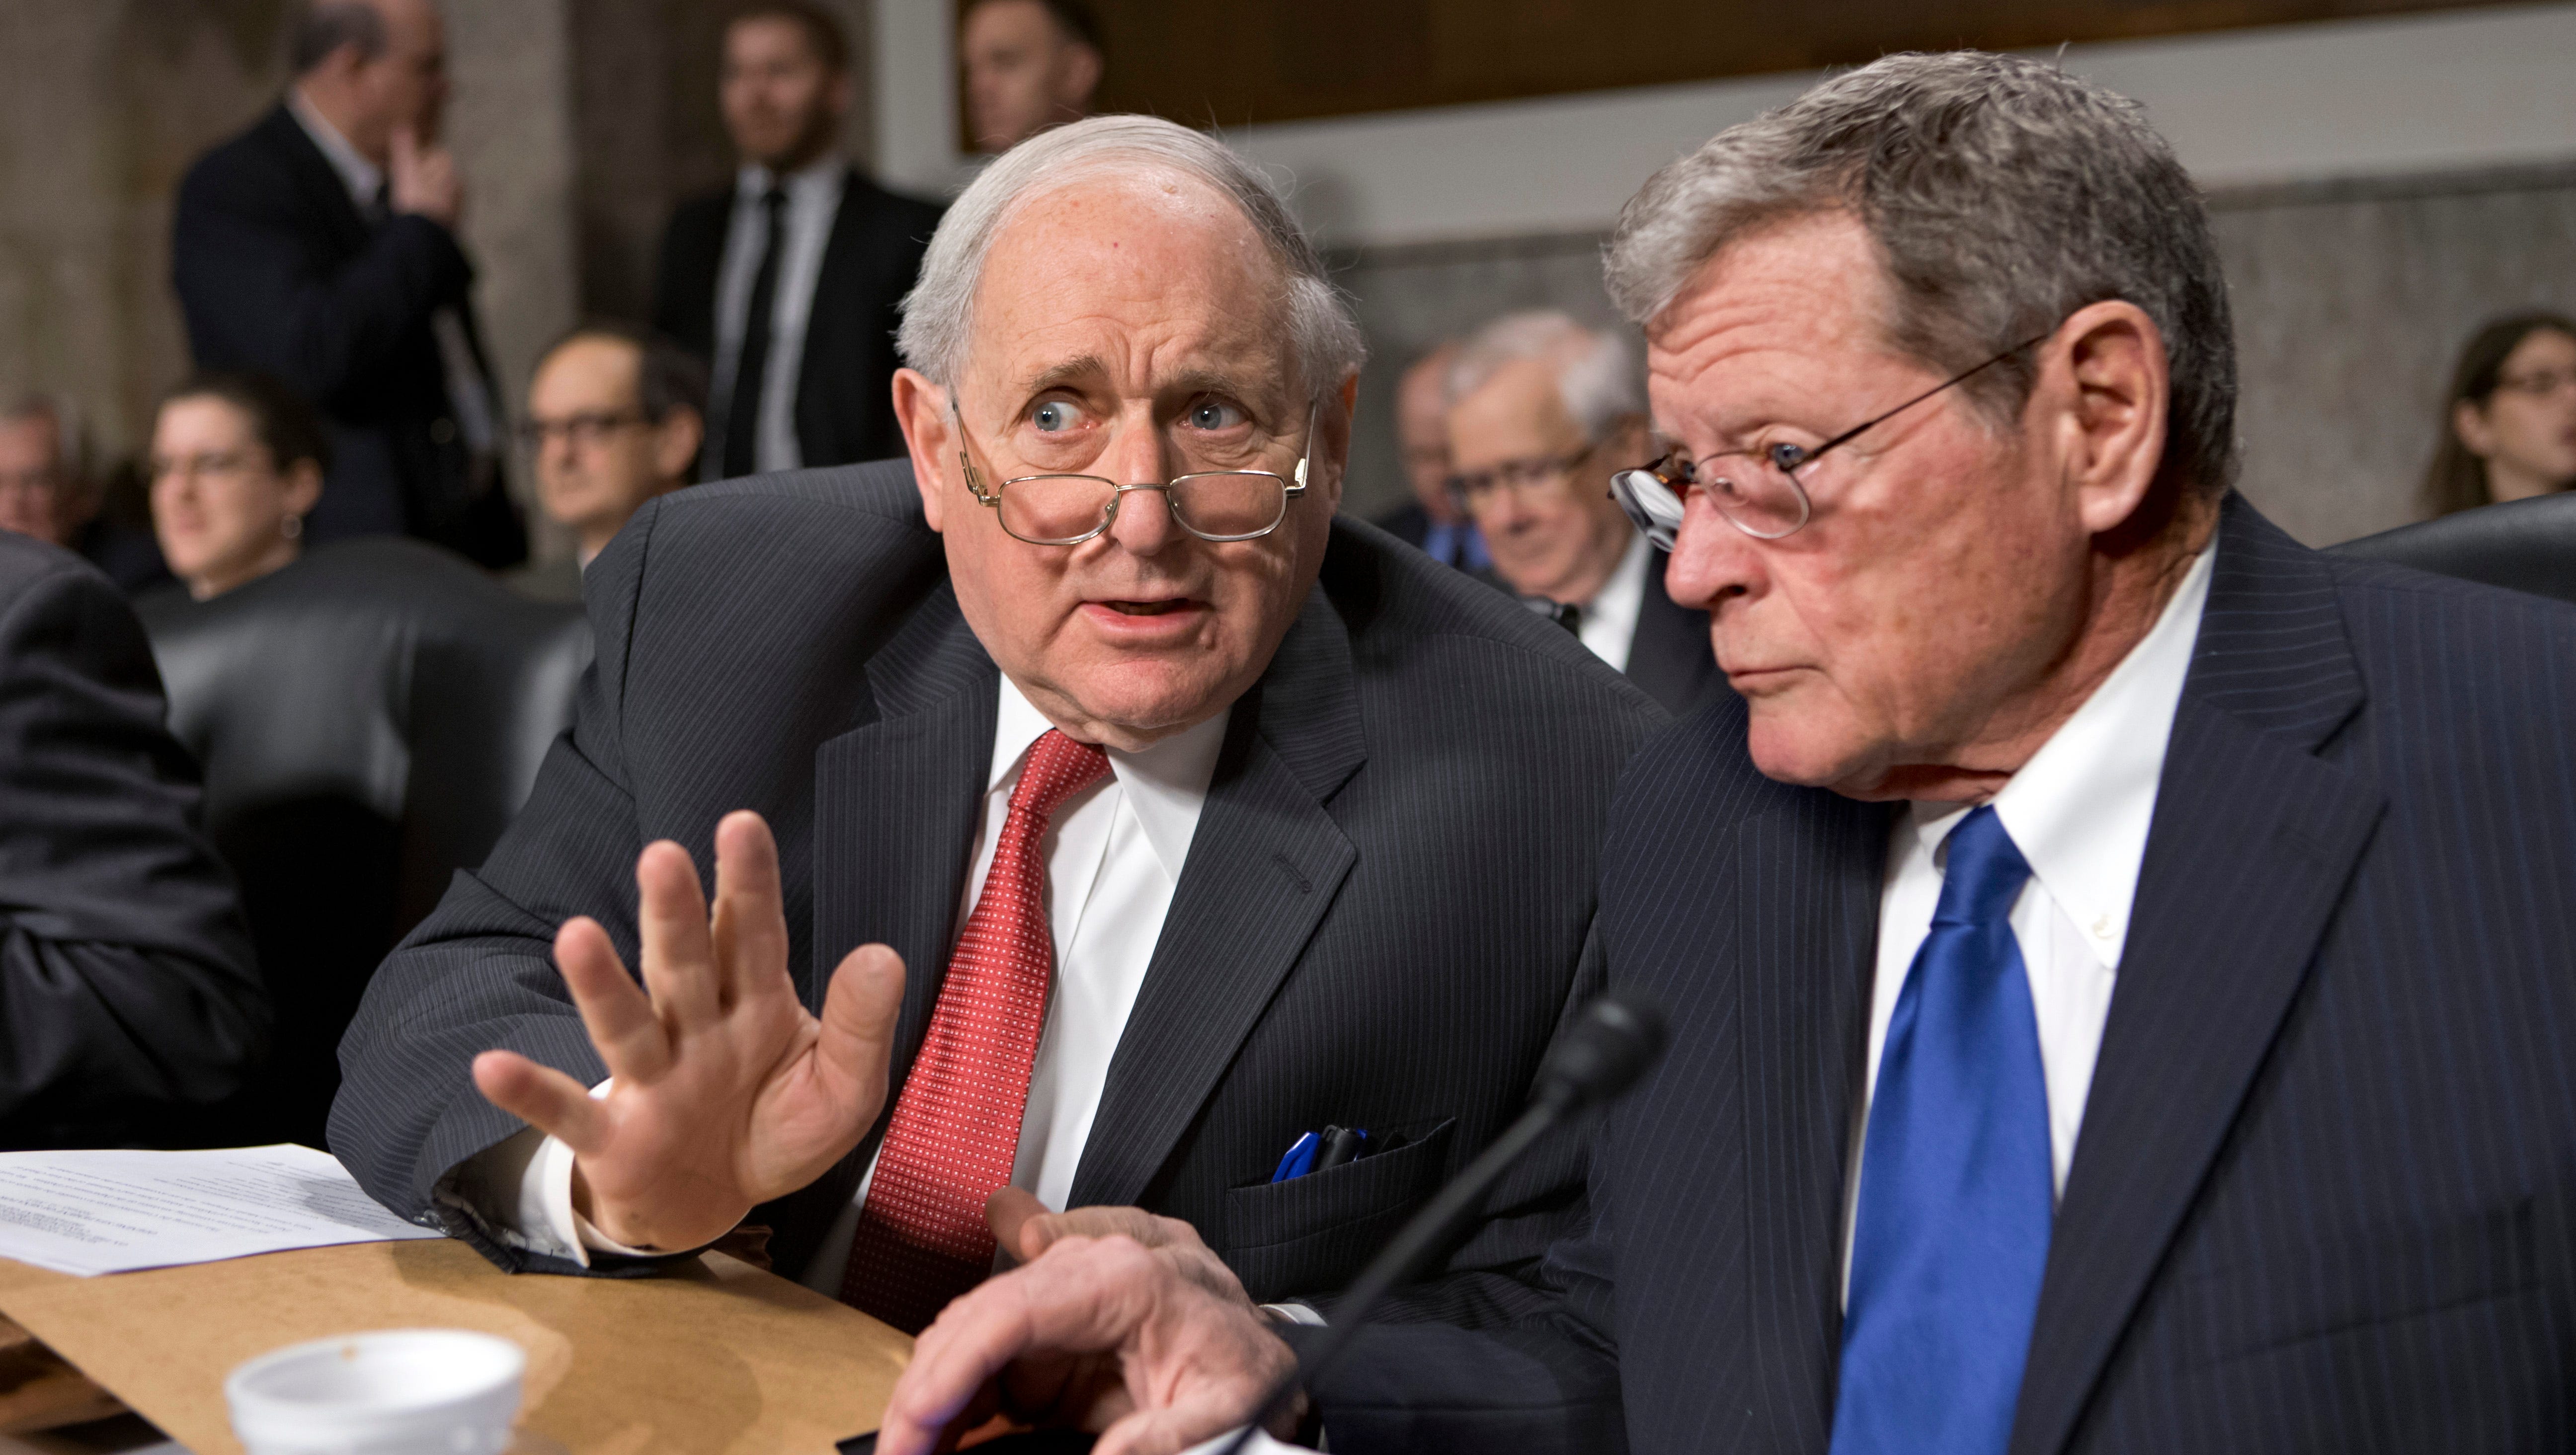 Sen. Carl Levin talks with  Sen. James Inhofe, R-Okla., on Capitol Hill Feb. 12, 2013, at the start of a hearing on the looming cuts to the defense budget.